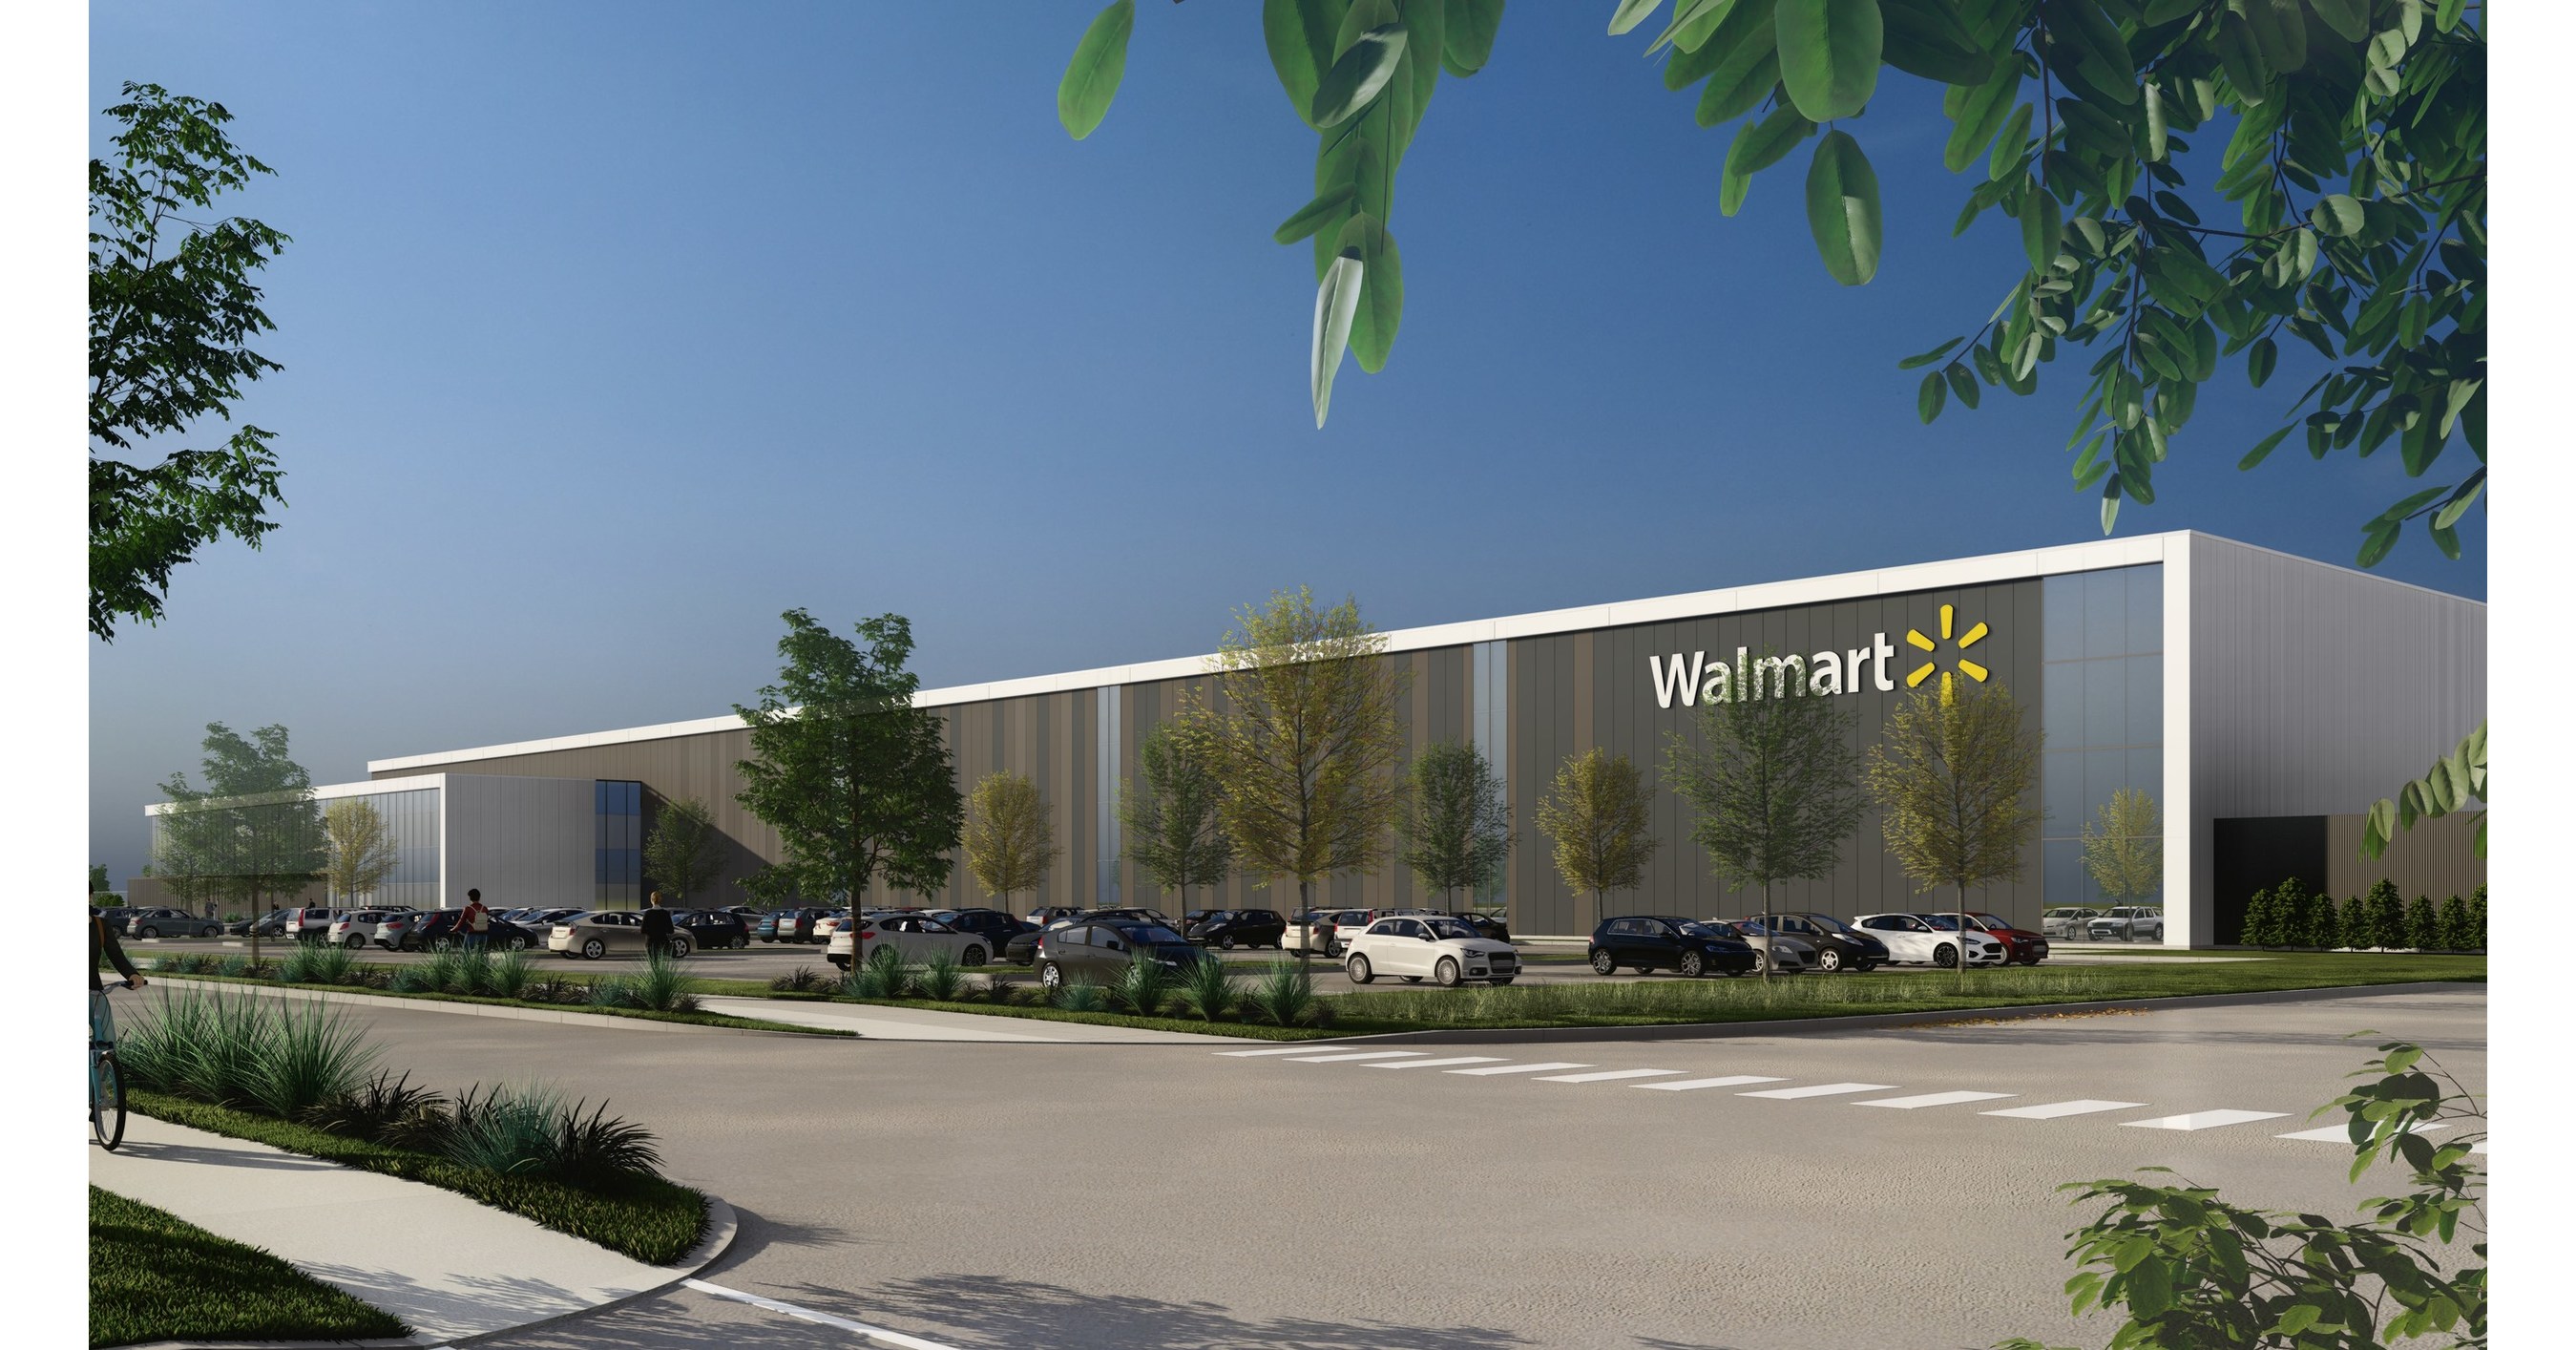 Walmart Canada to build its first-ever fulfillment centre in